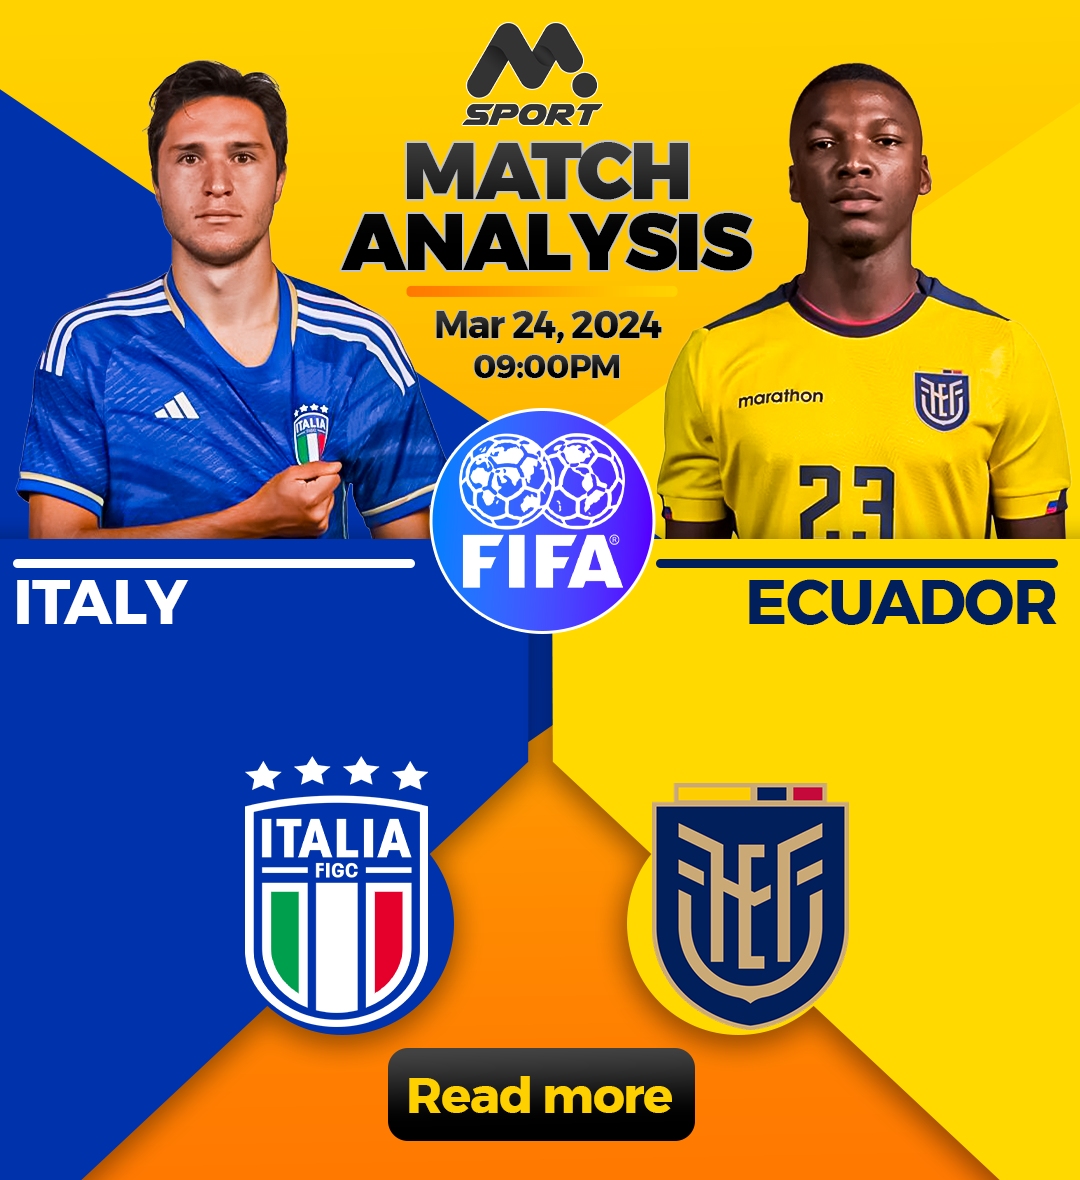 Italy vs Ecuador: 2022 Euro Champions, Italy, Ready Themselves for Germany with Ecuador Test